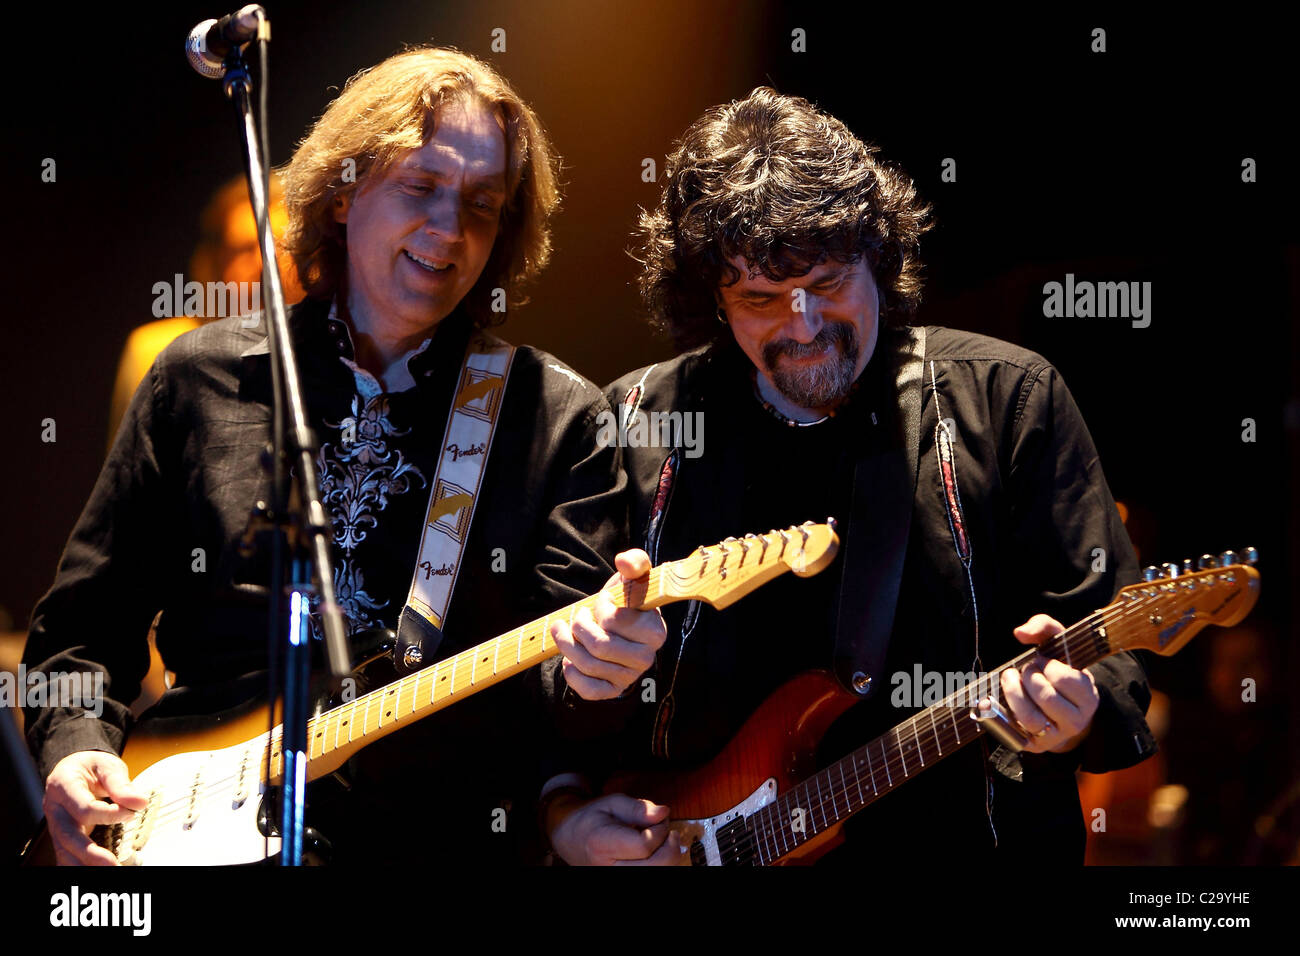 Eric Troyer and Phil Bates Electric Light Orchestra performing in Moscow Moscow, Russia - 10.12.09 Stock Photo Alamy